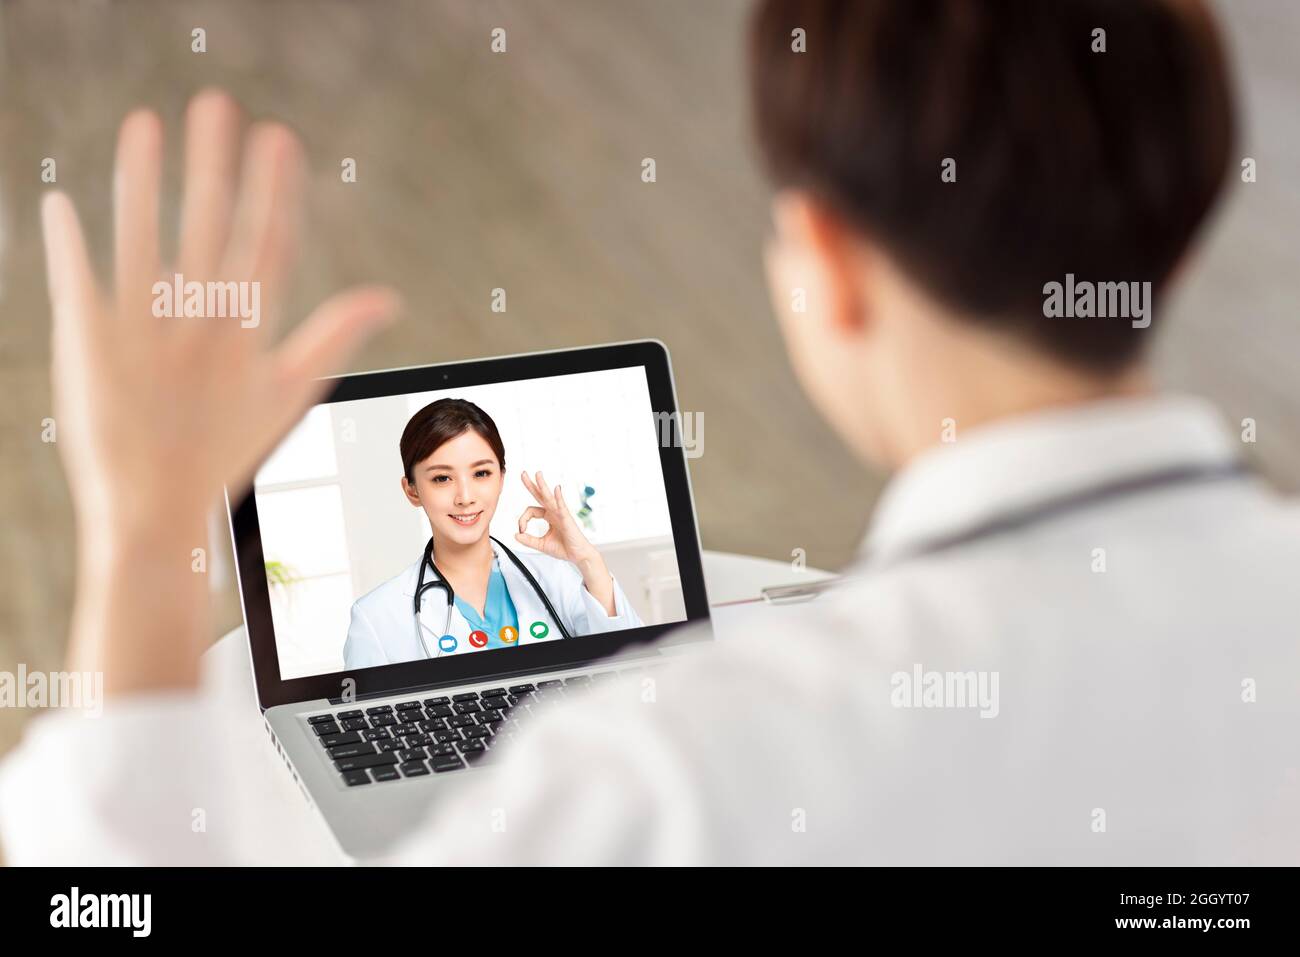 Back view of doctor making video call with his colleague.Smiling doctor showing ok gesture. Stock Photo